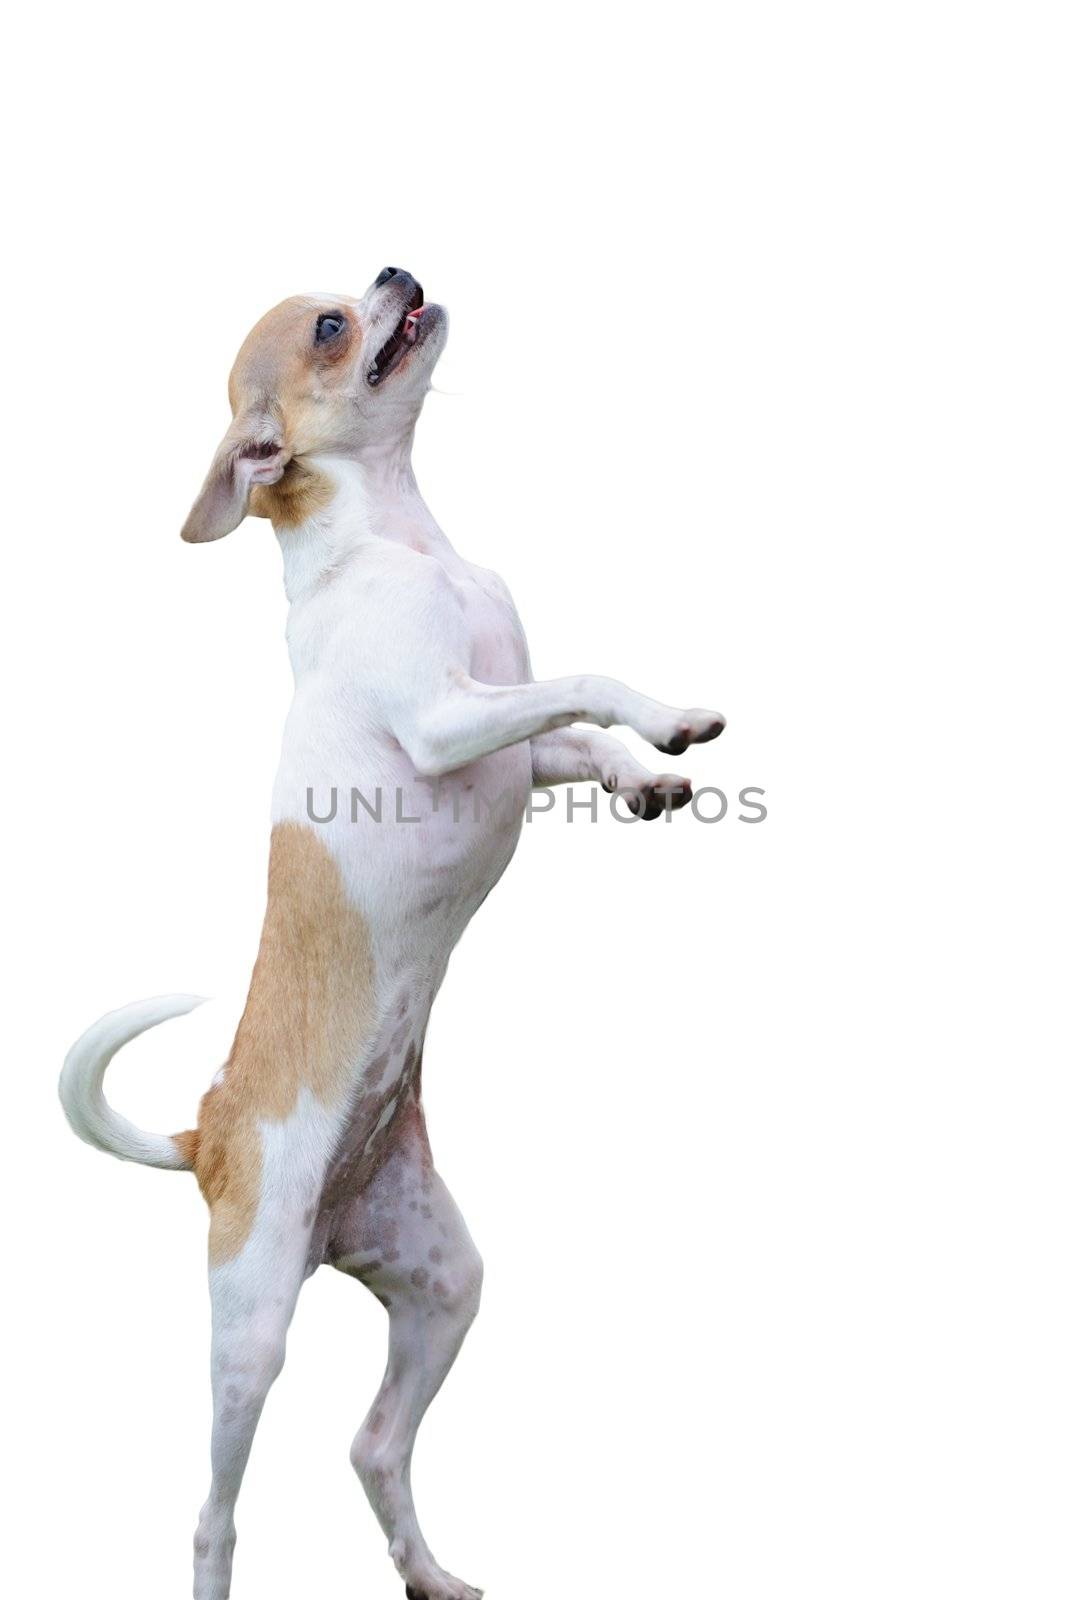 Chihuahua dog standing on two legs isolated on white background